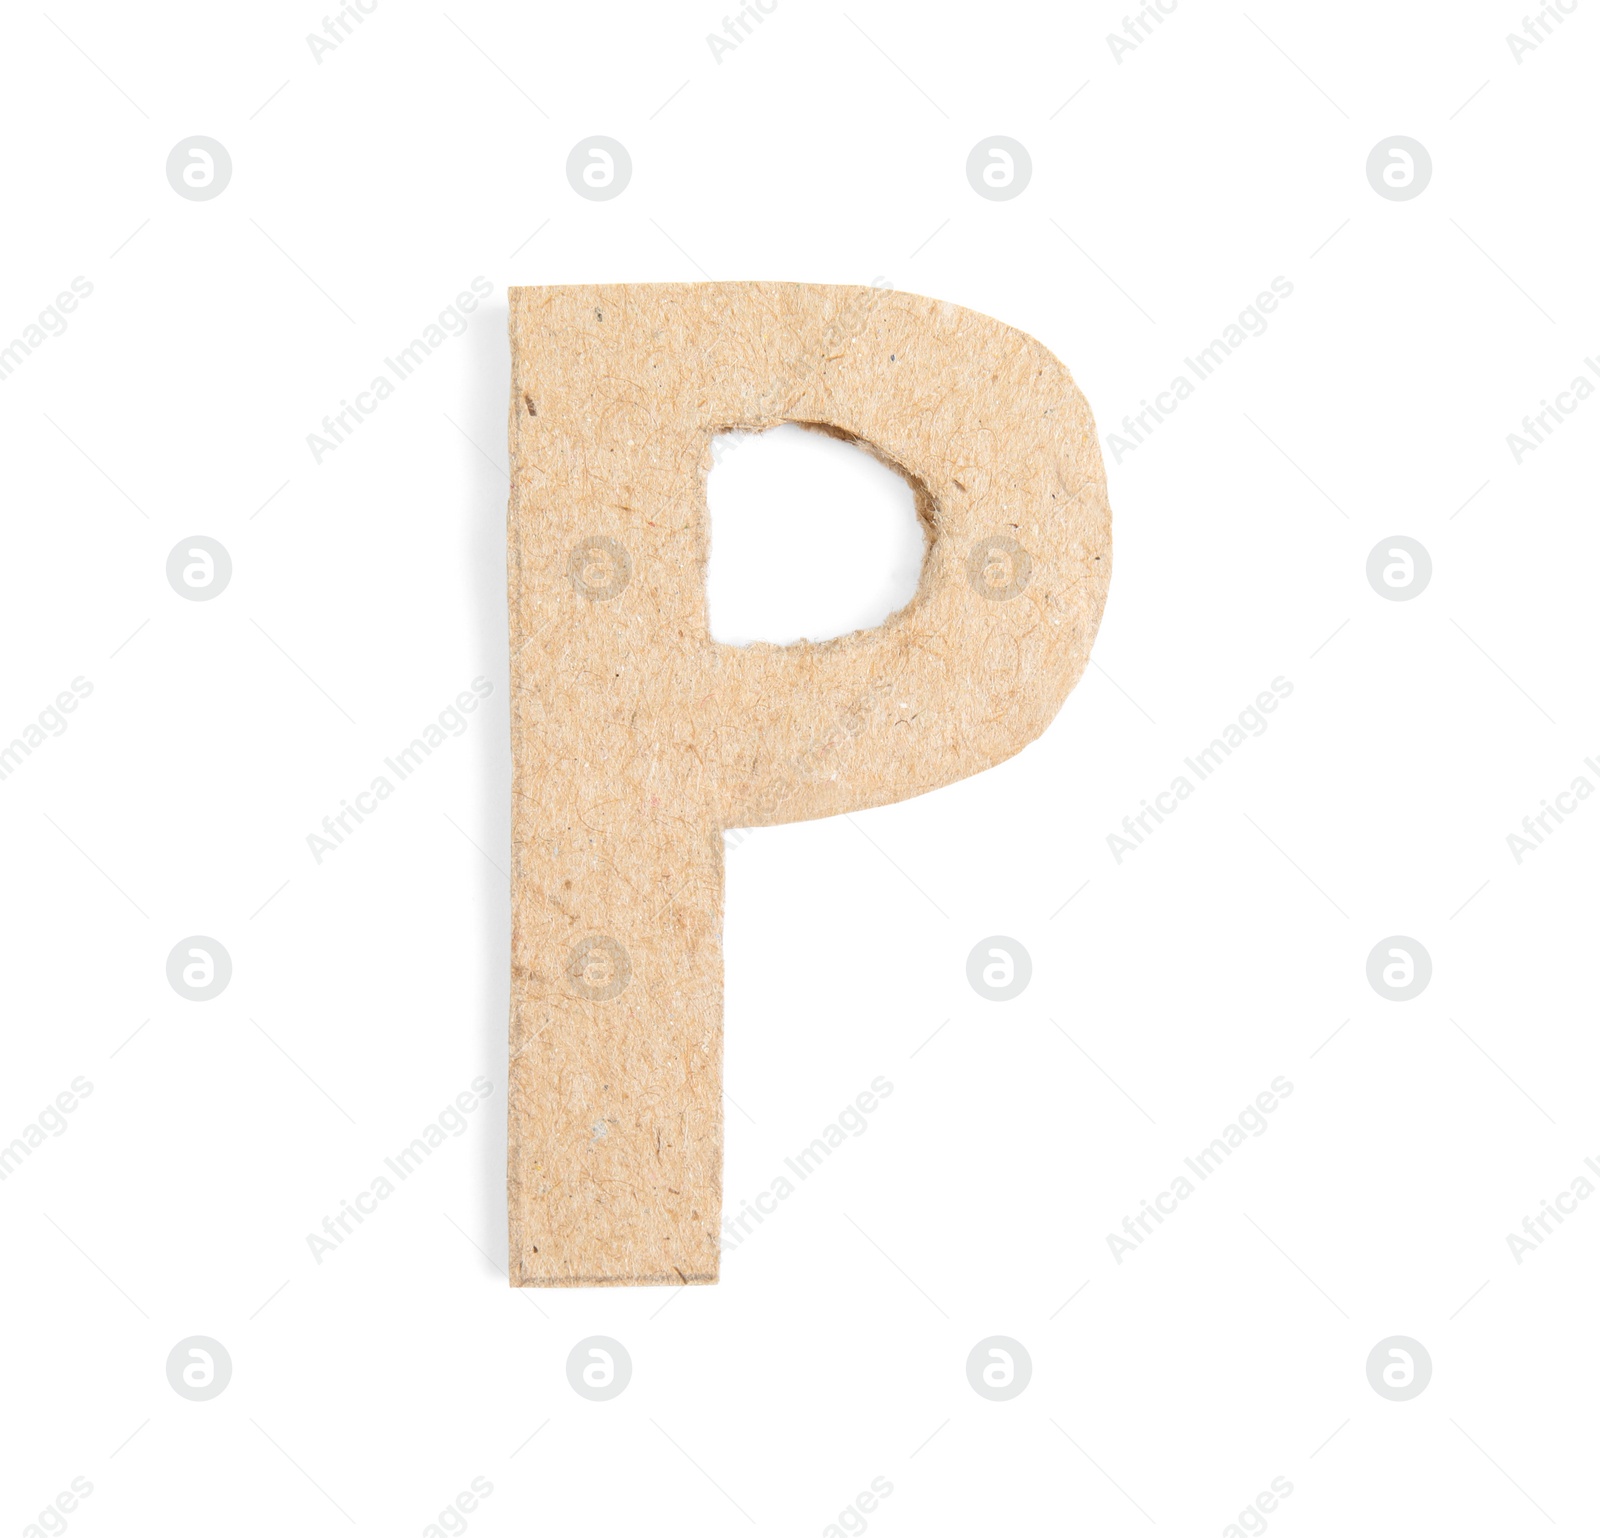 Photo of Letter P made of cardboard isolated on white